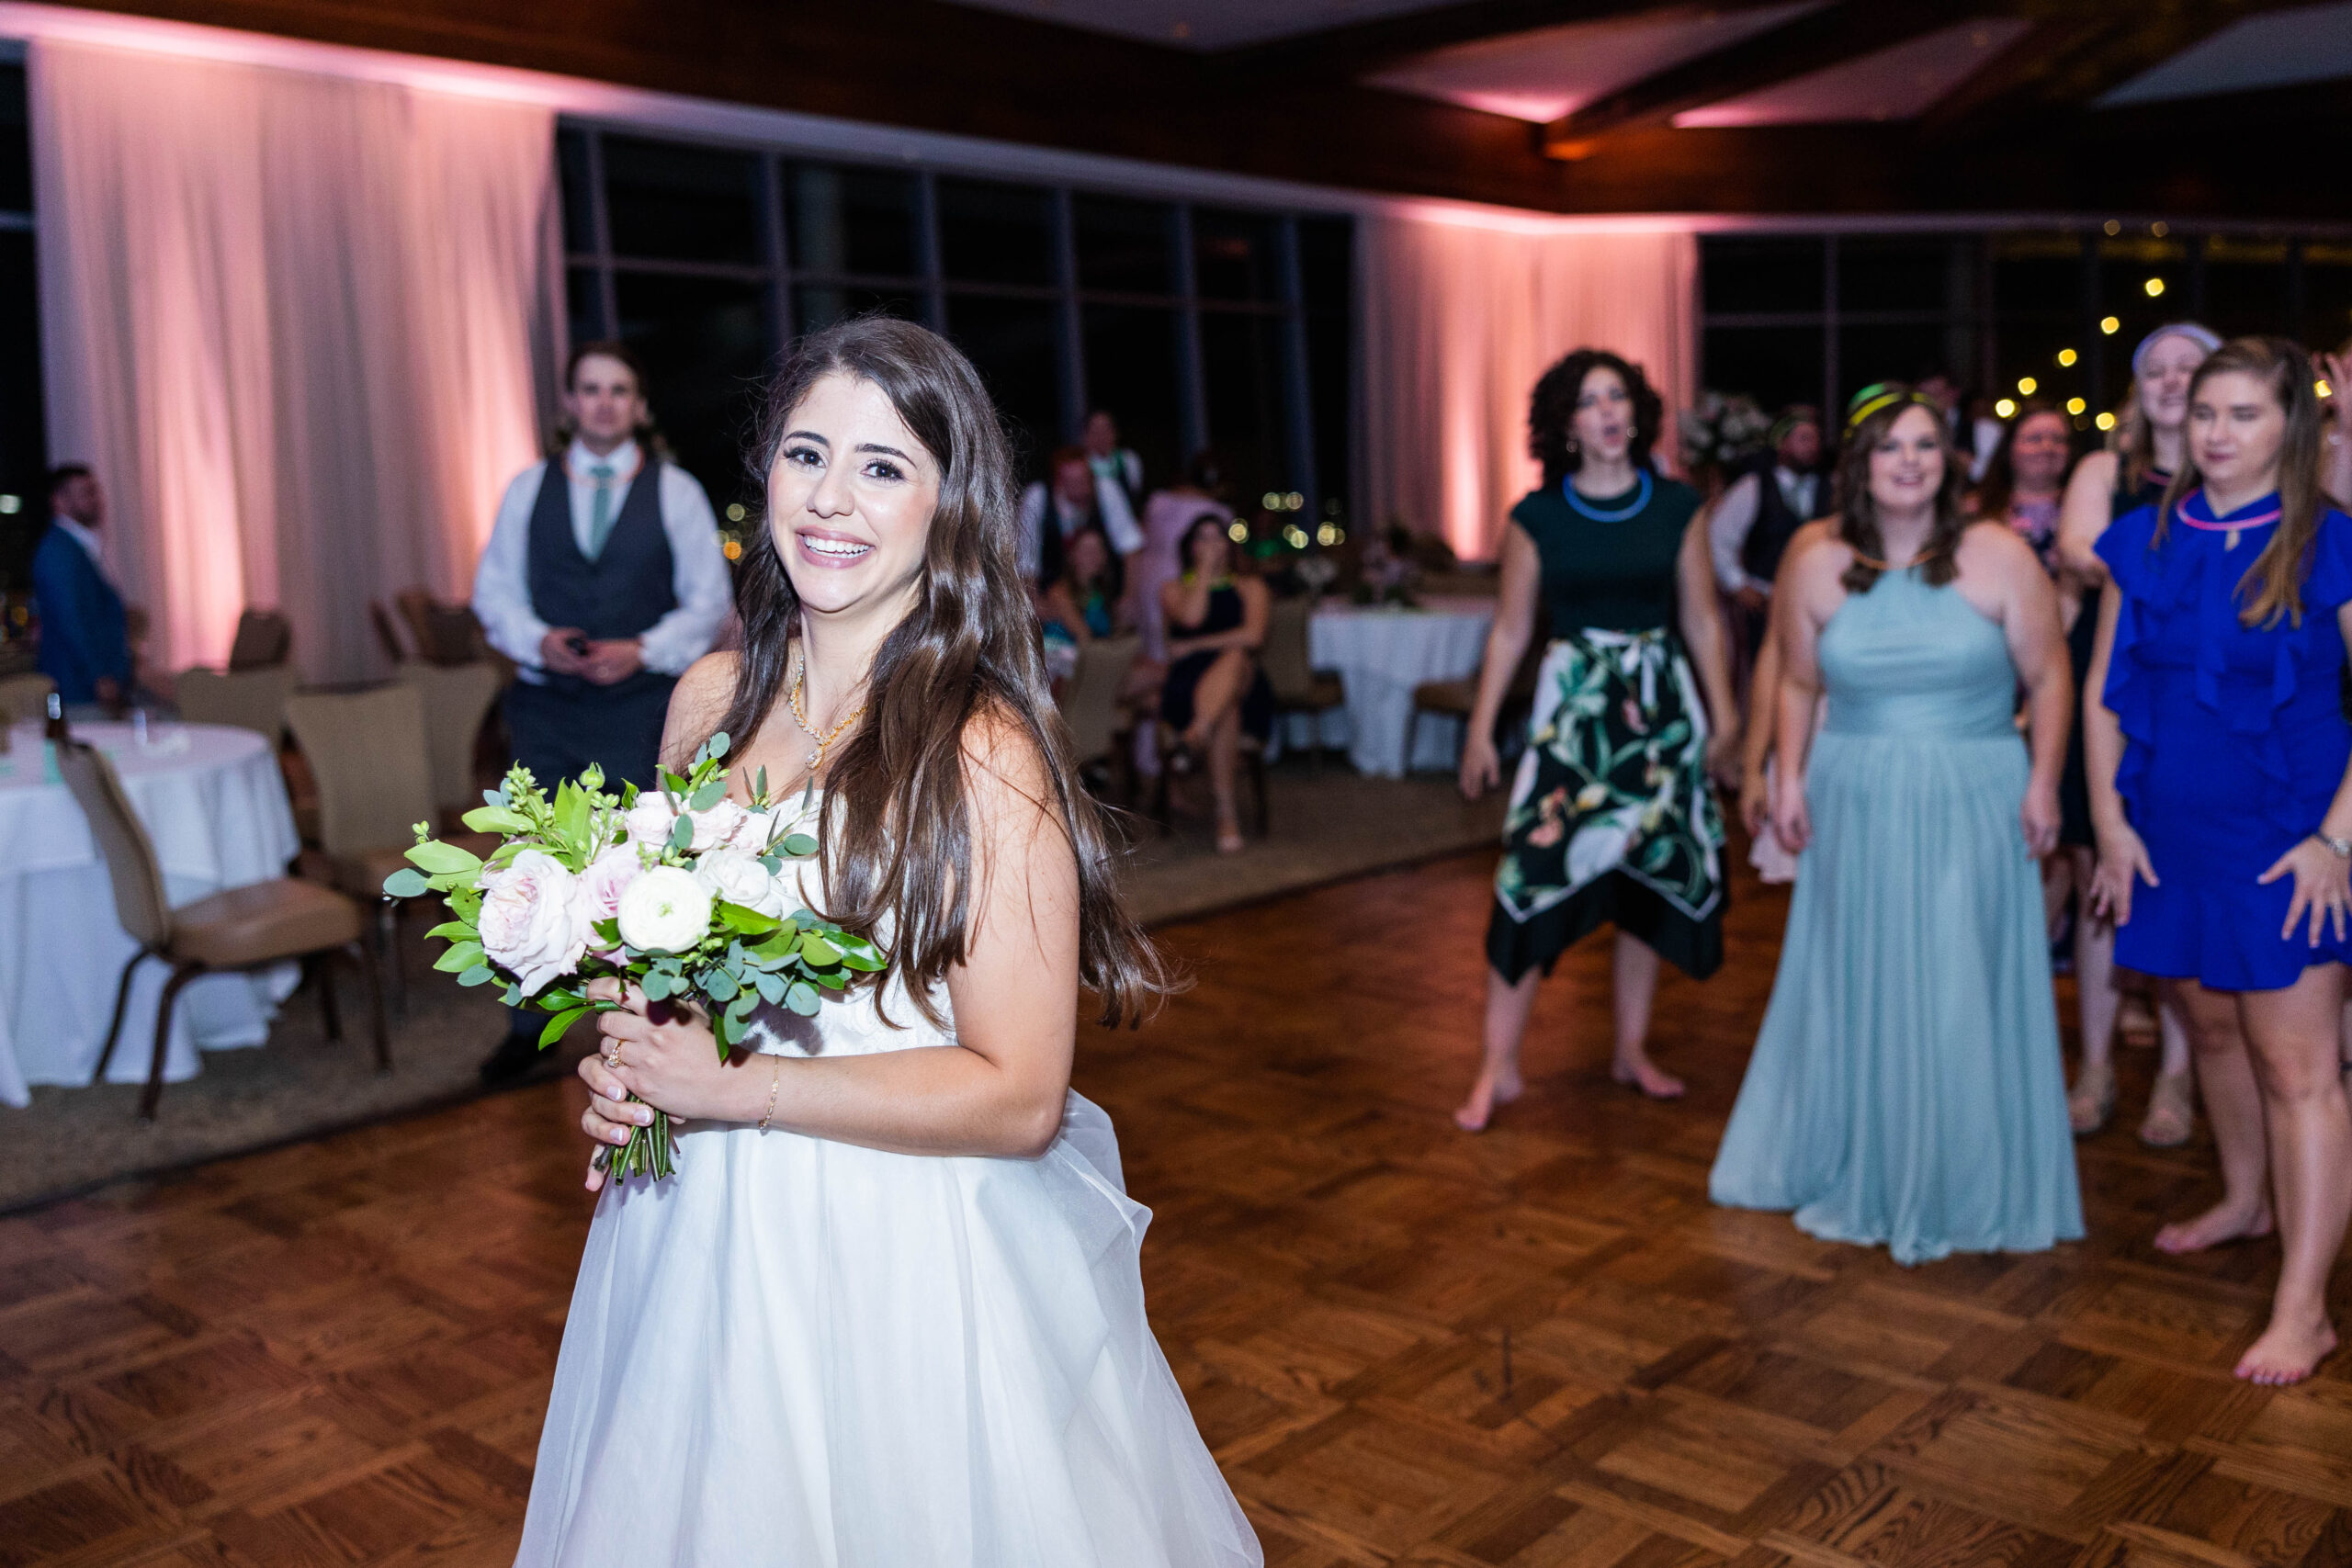 Eleanor Stenner Photography - a wedding photographer in Birmingham, AL - shares details you can't forget when planning your wedding! 